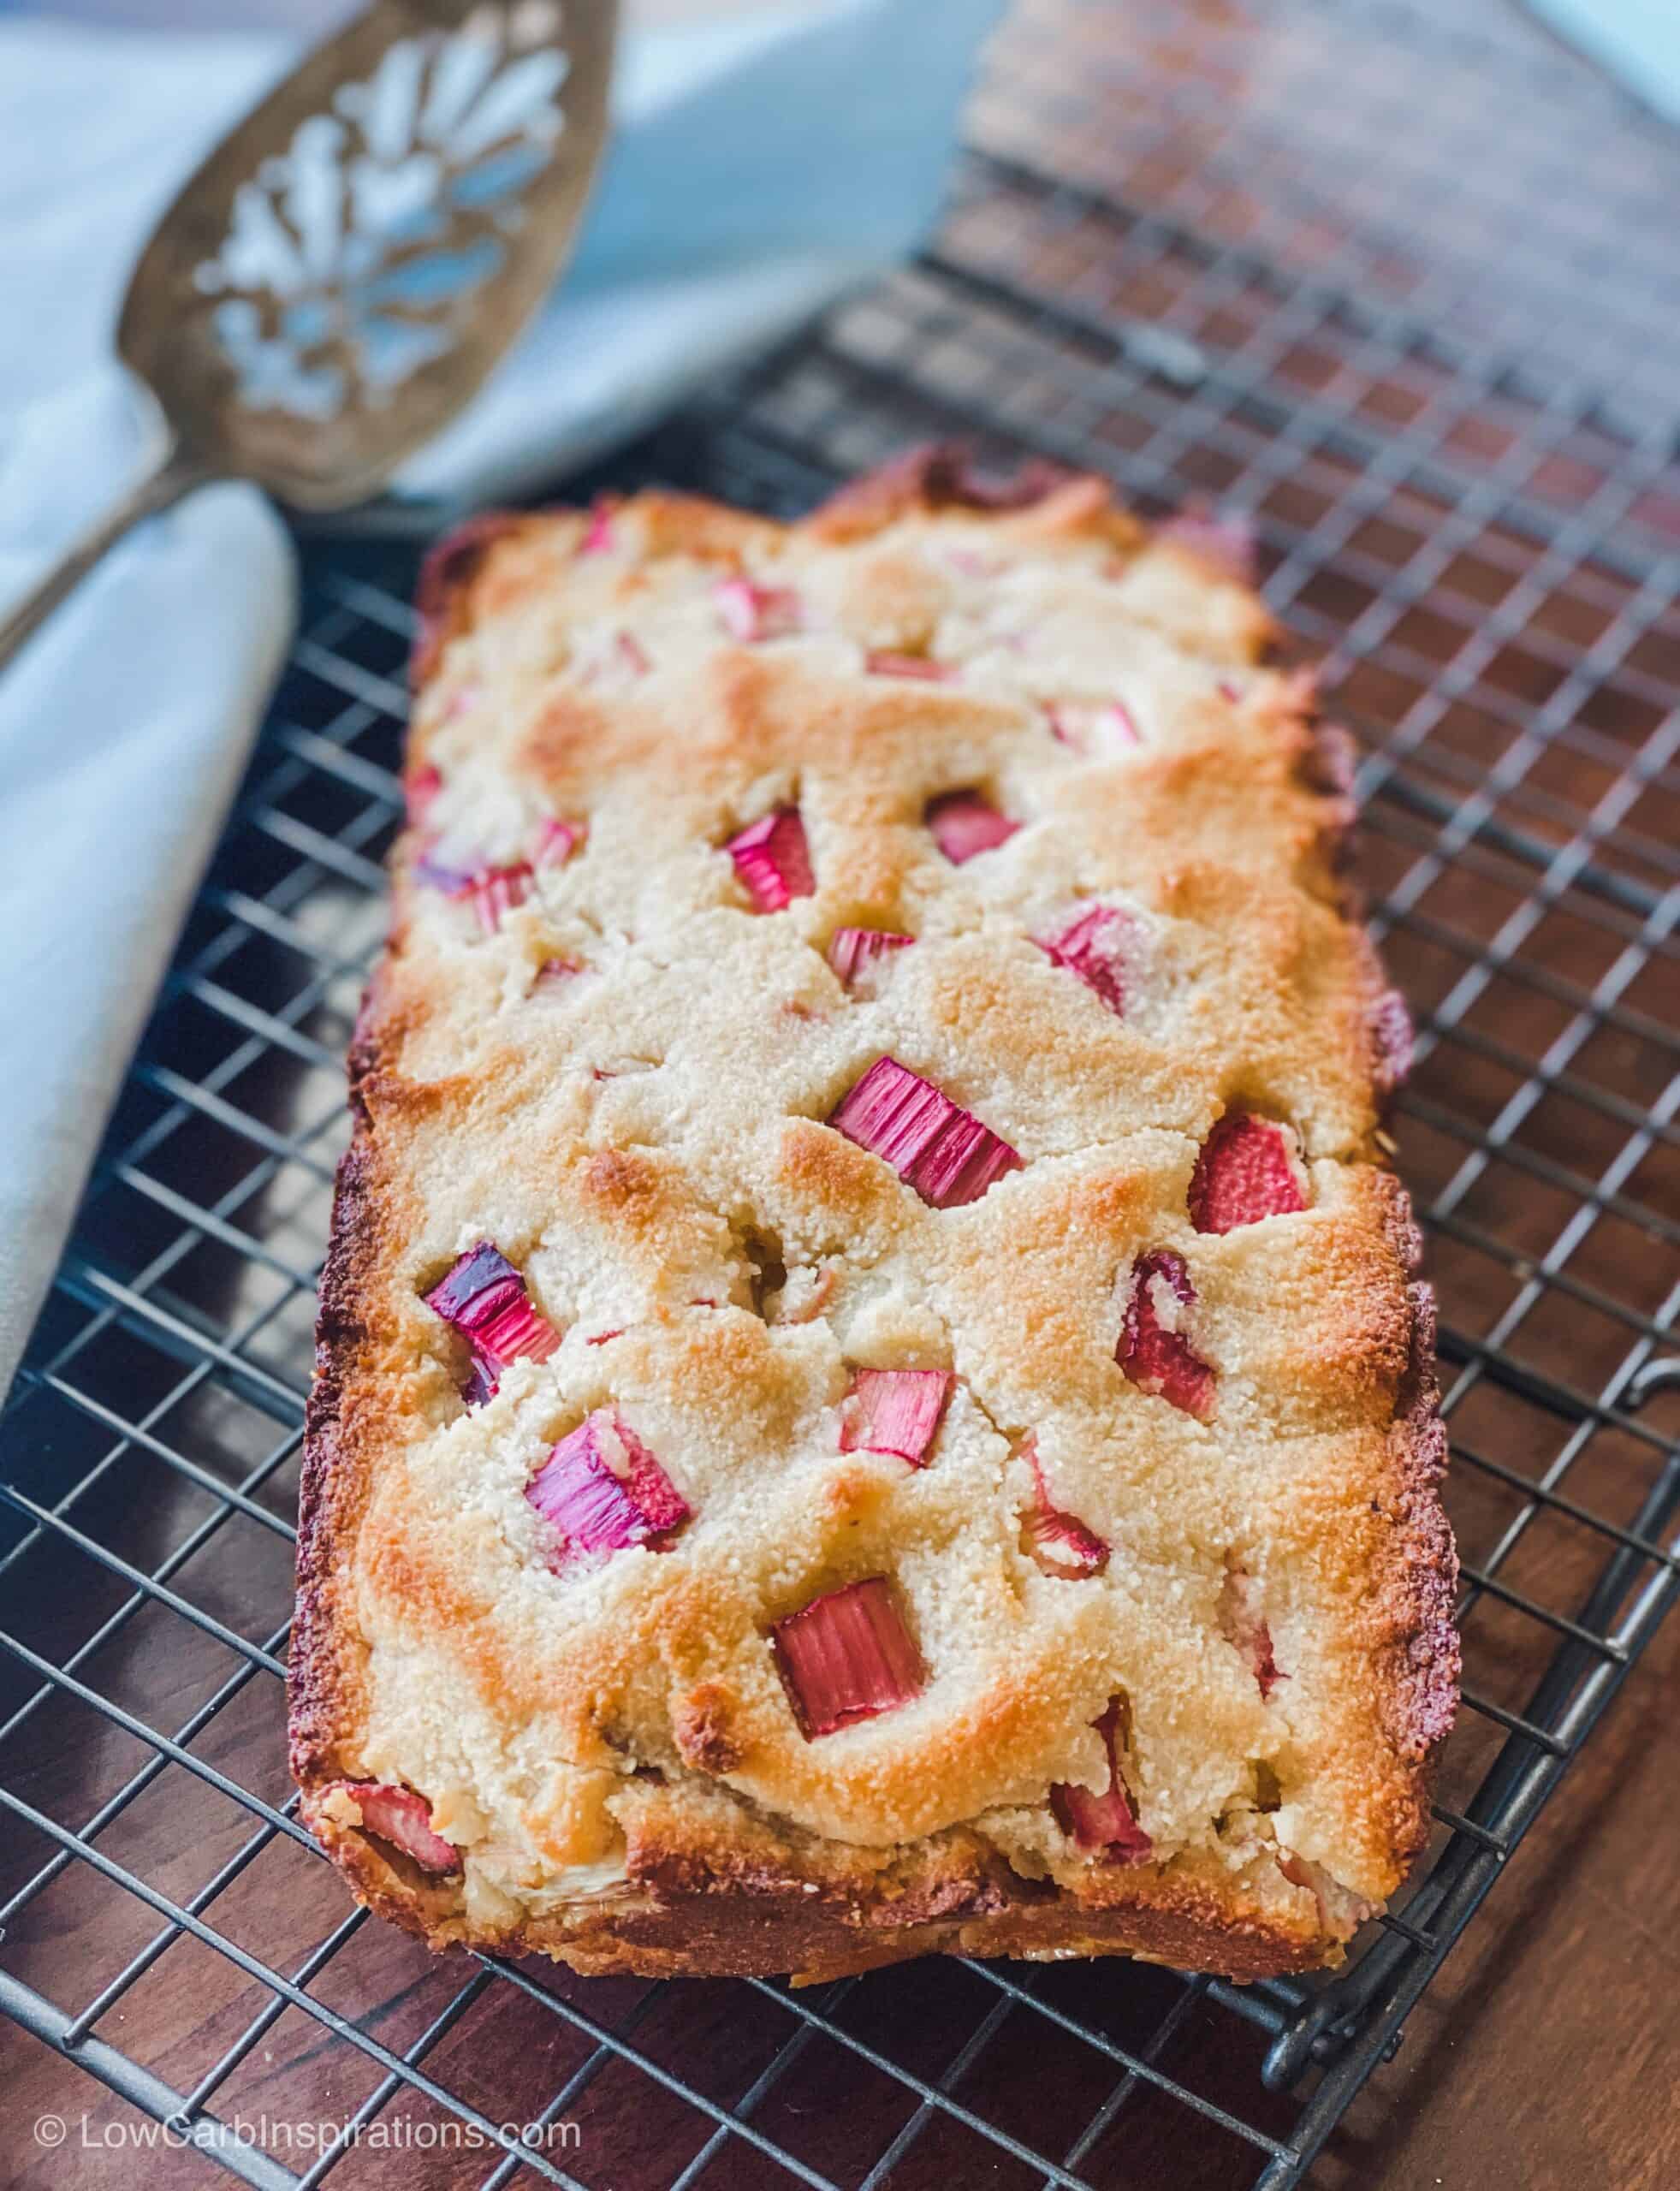 Keto Rhubarb Bread Recipe with a Glaze Topping